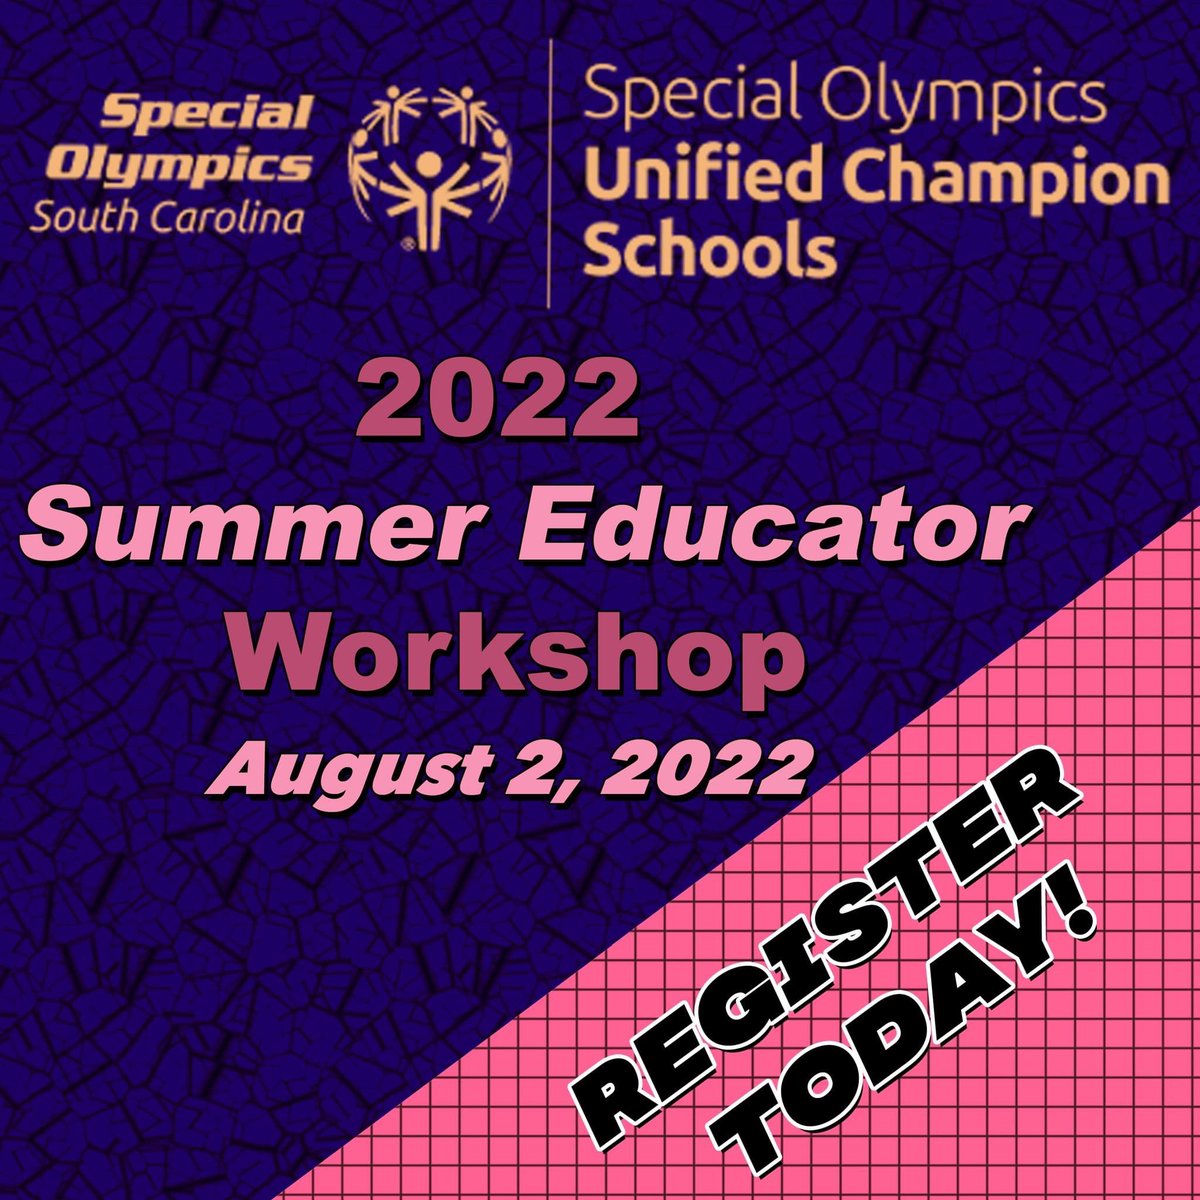 Join us for the Unified Champion Schools Summer Educator Workshop! This is a great opportunity to learn from other schools around the state and hear what's new for the upcoming school-year. Register here: bit.ly/2022EduWork